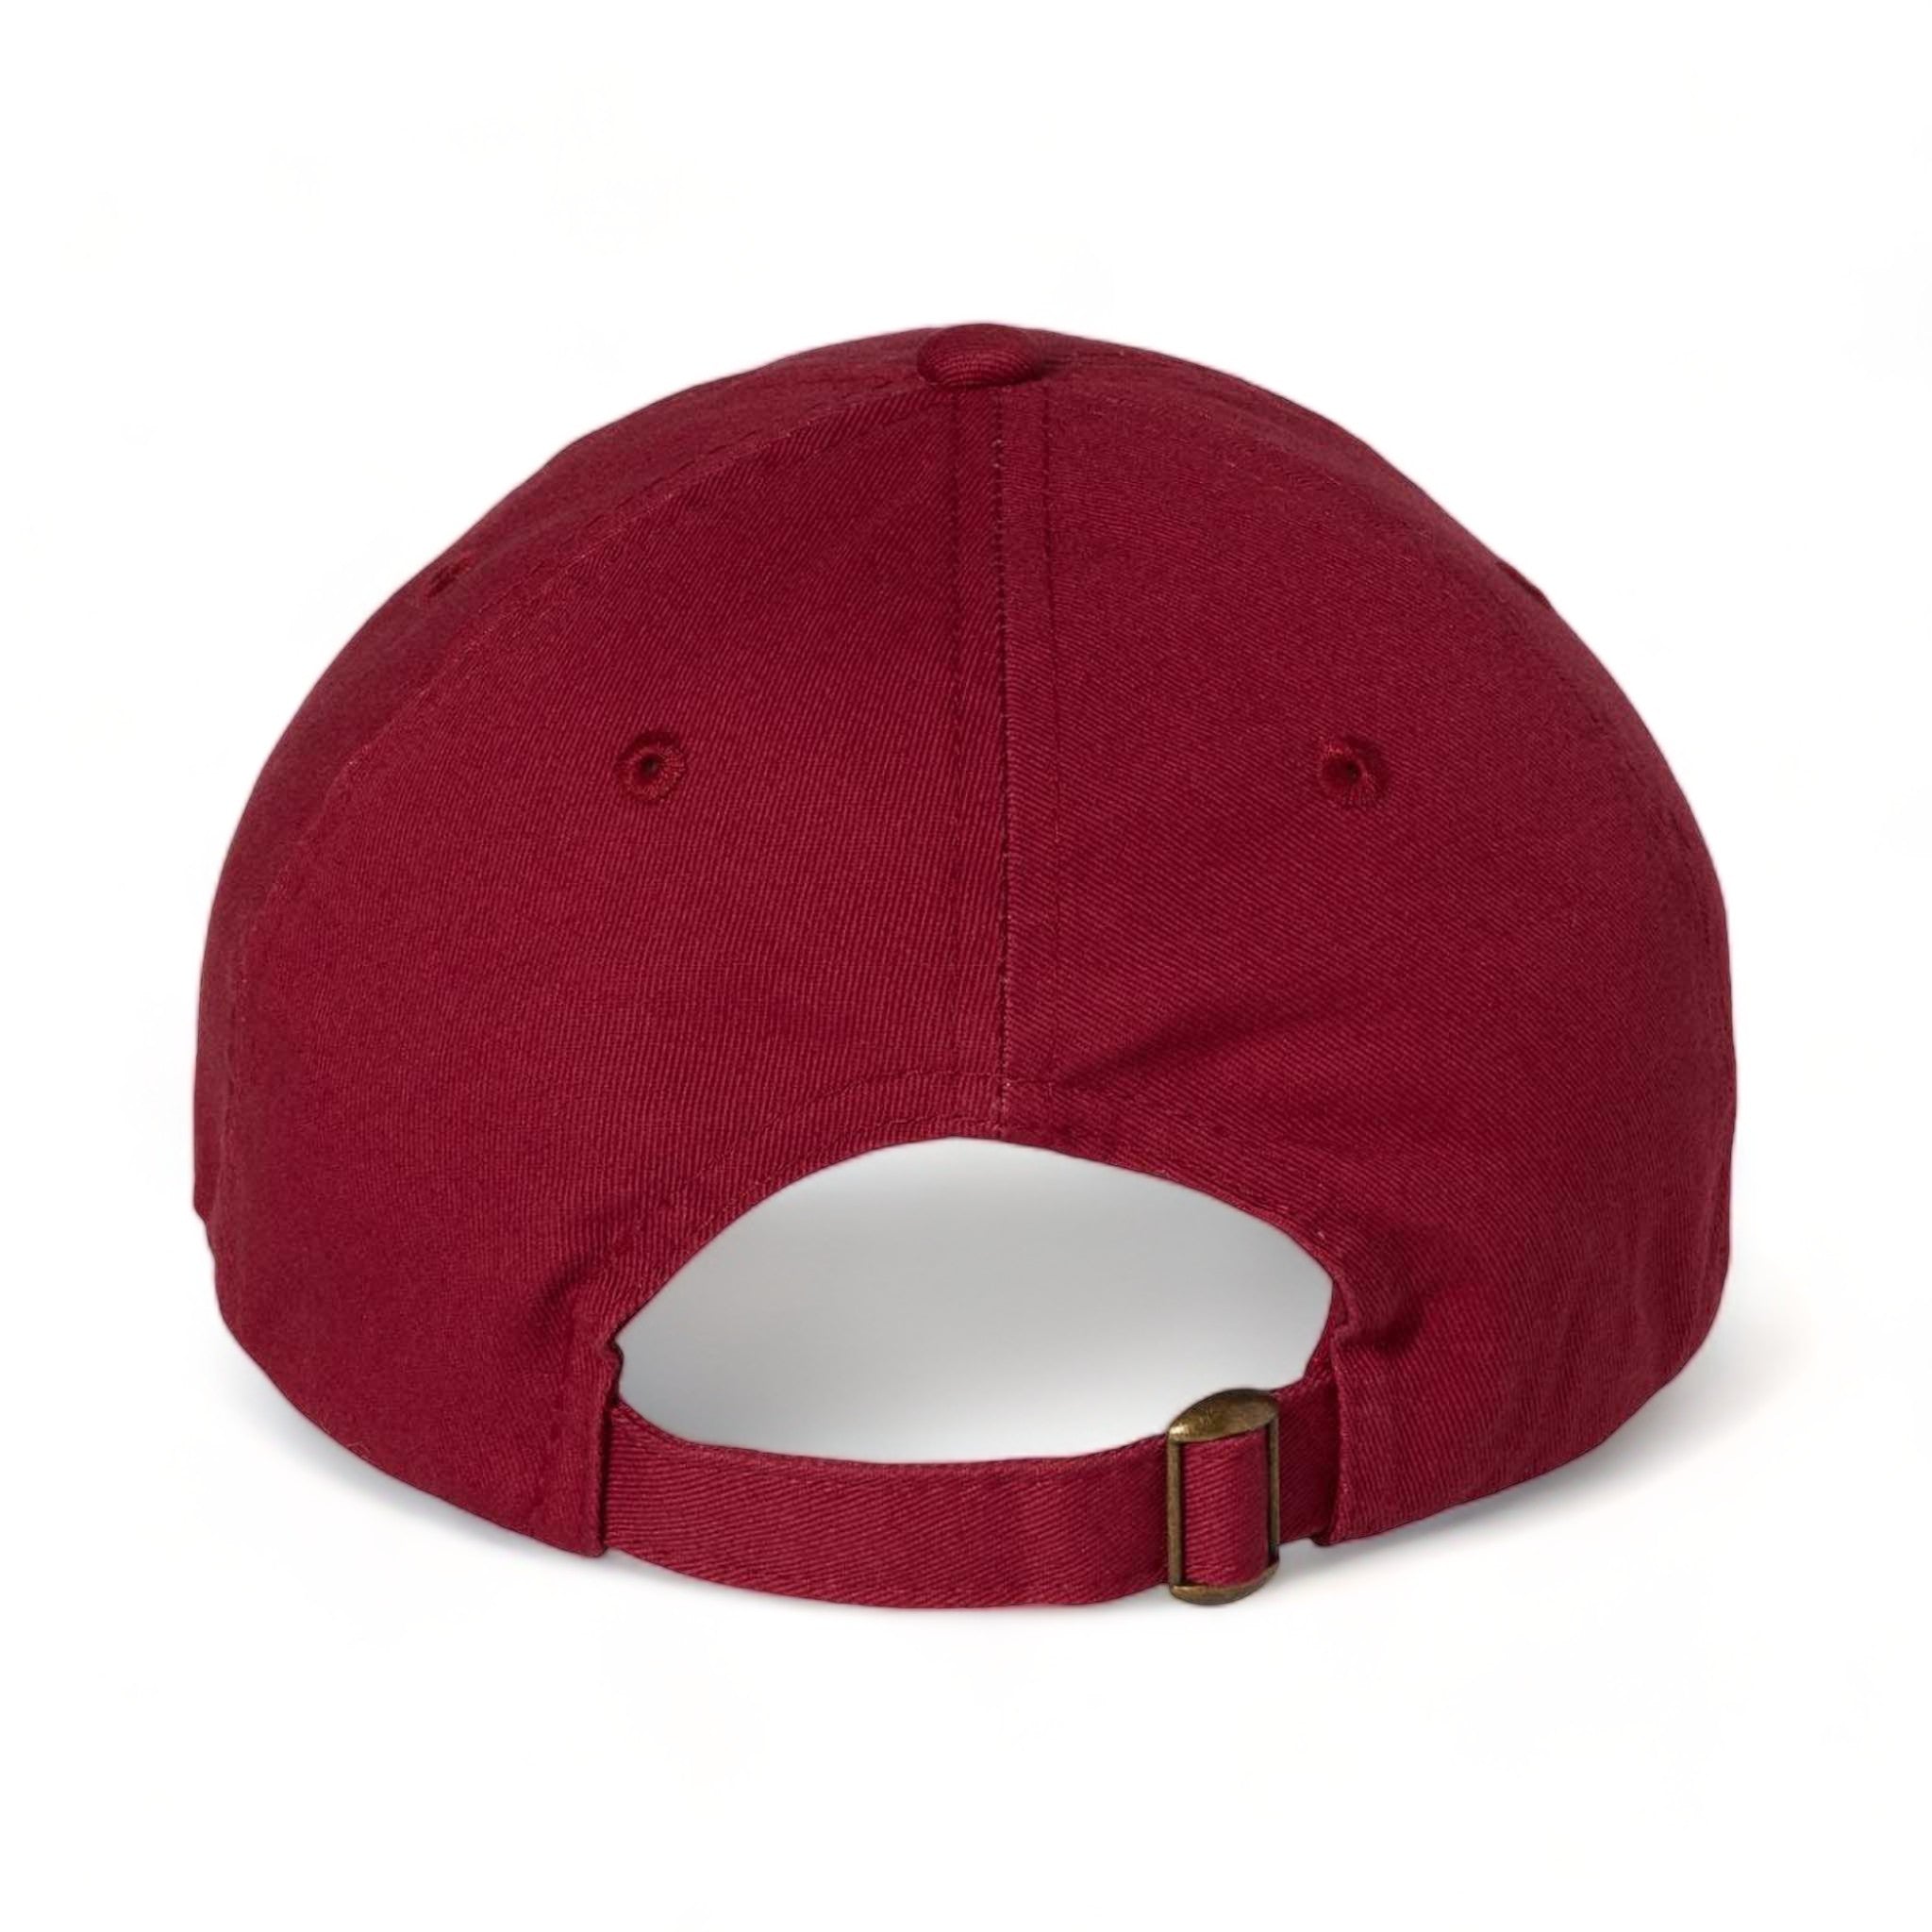 Back view of Valucap VC300A custom hat in cardinal